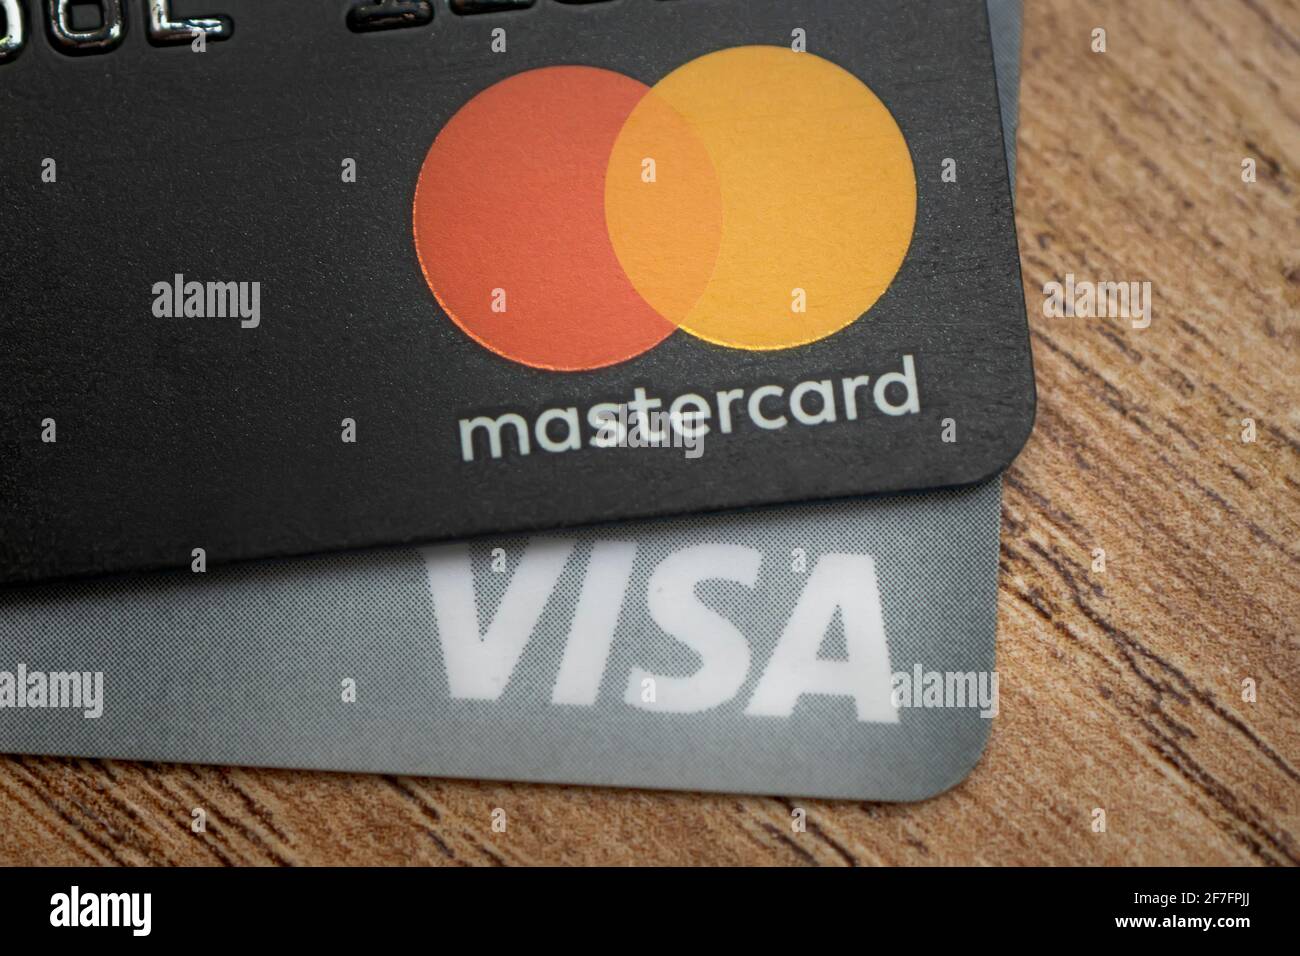 March 26, 2021. Close-up of a visa and mastercard cards on a wooden table Stock Photo